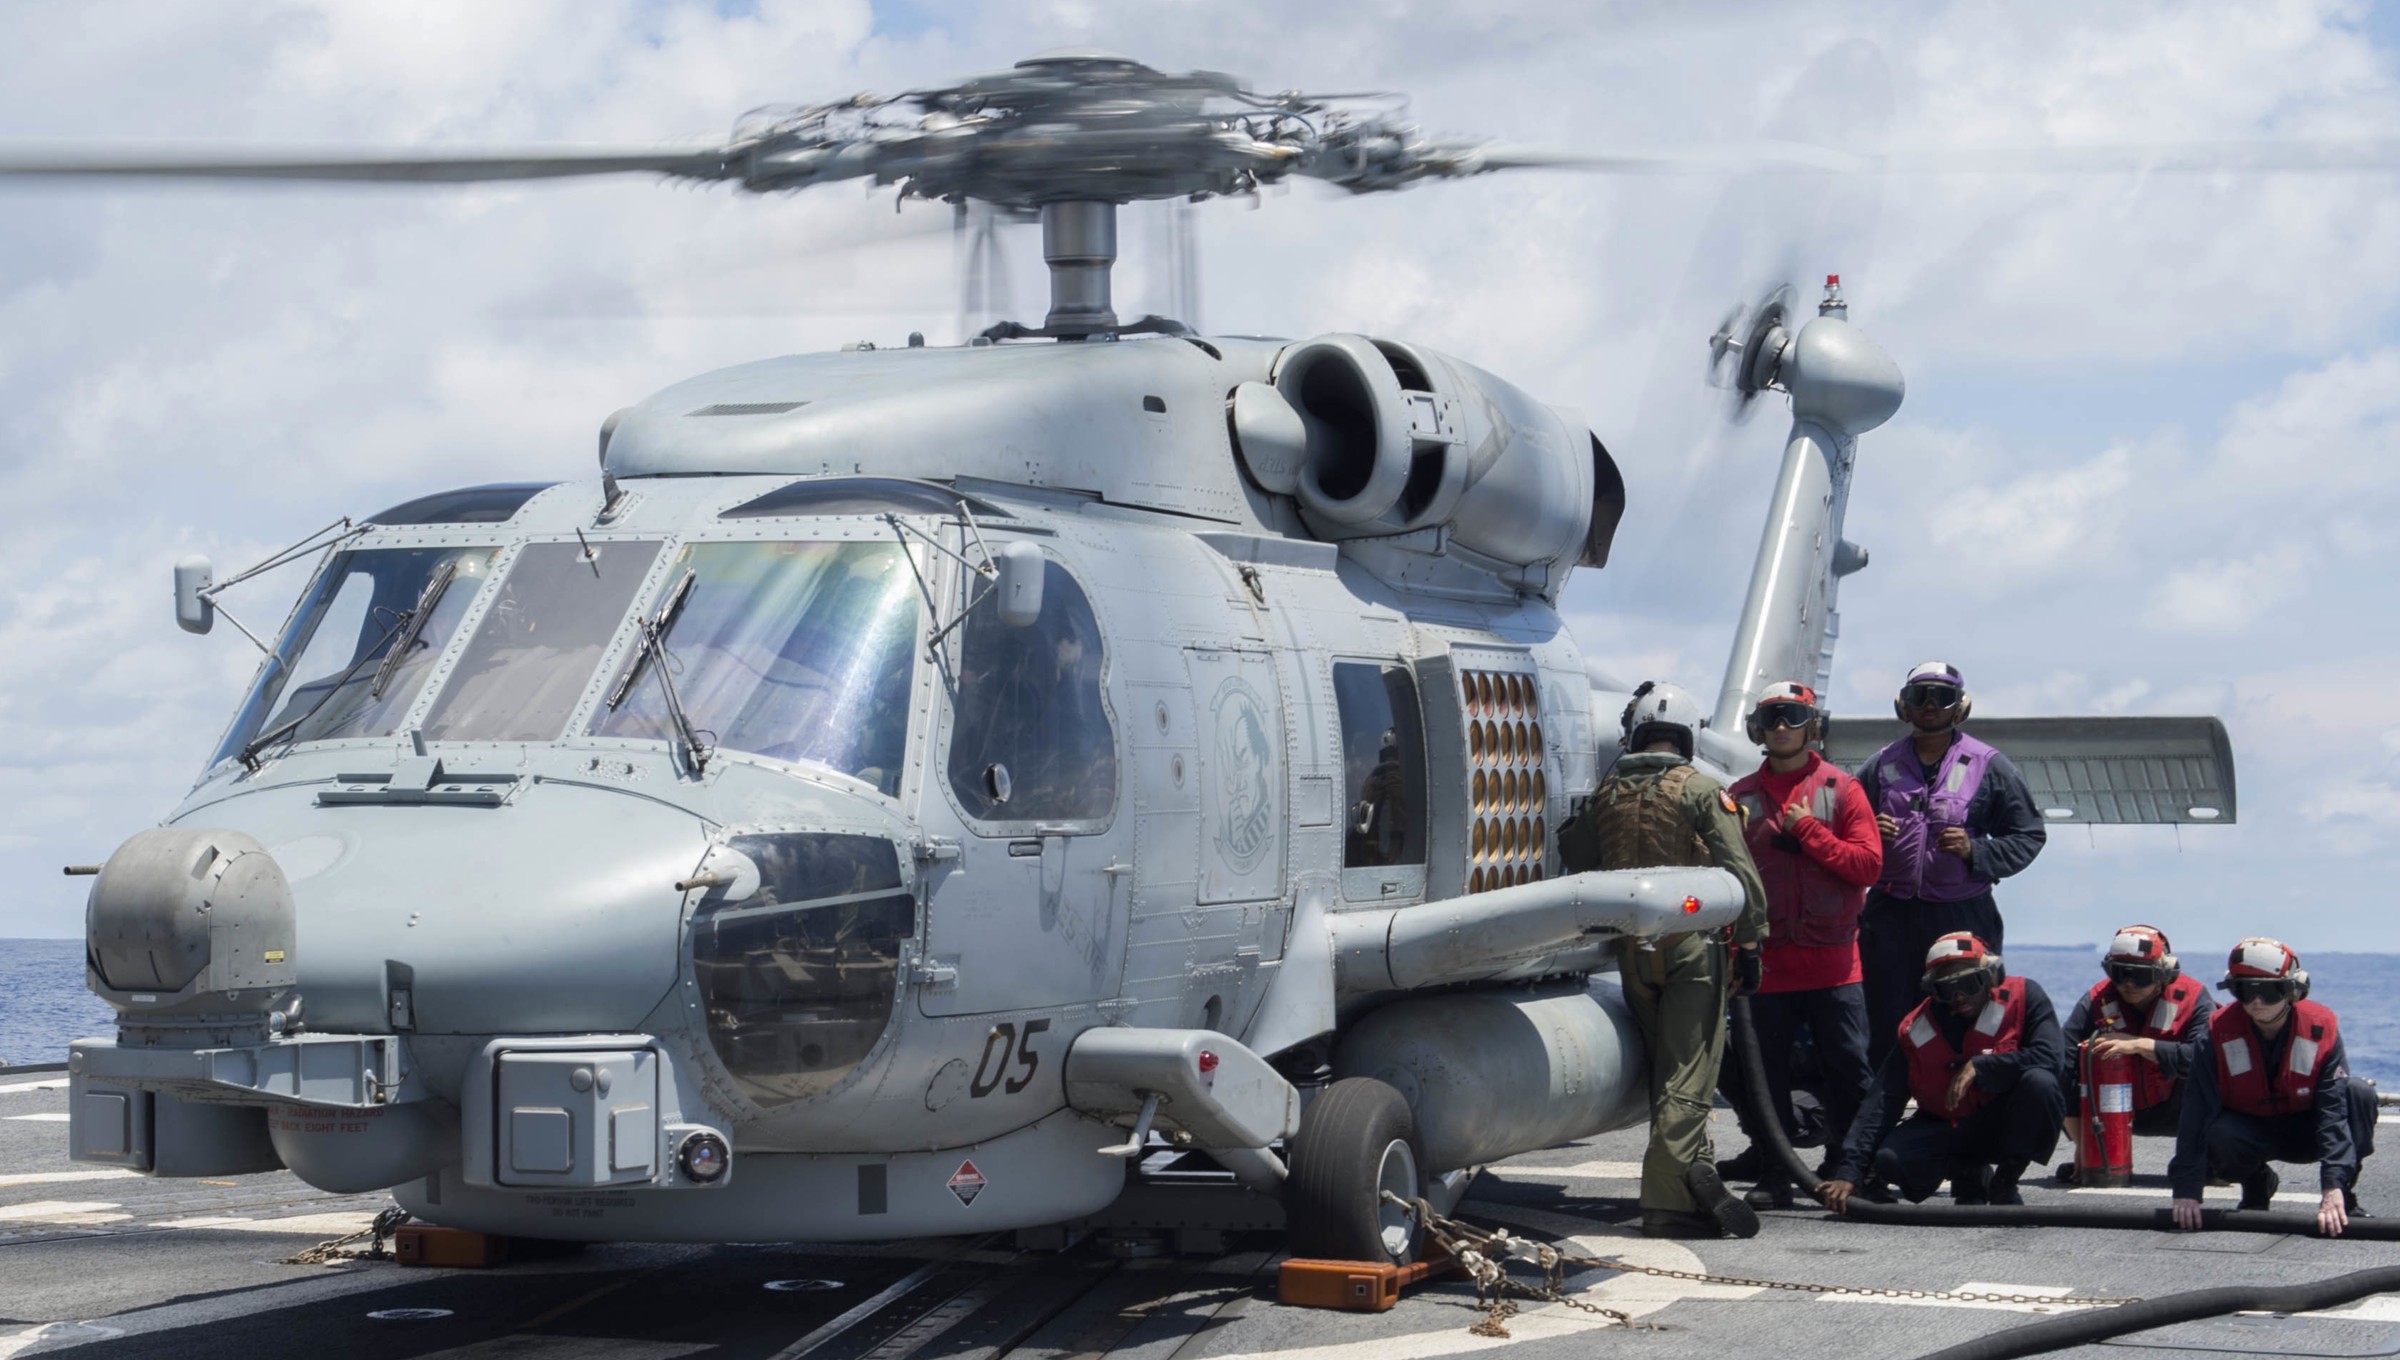 hsm-51 warlords helicopter maritime strike squadron mh-60r seahawk navy 2016 41 uss mccampbell ddg-85